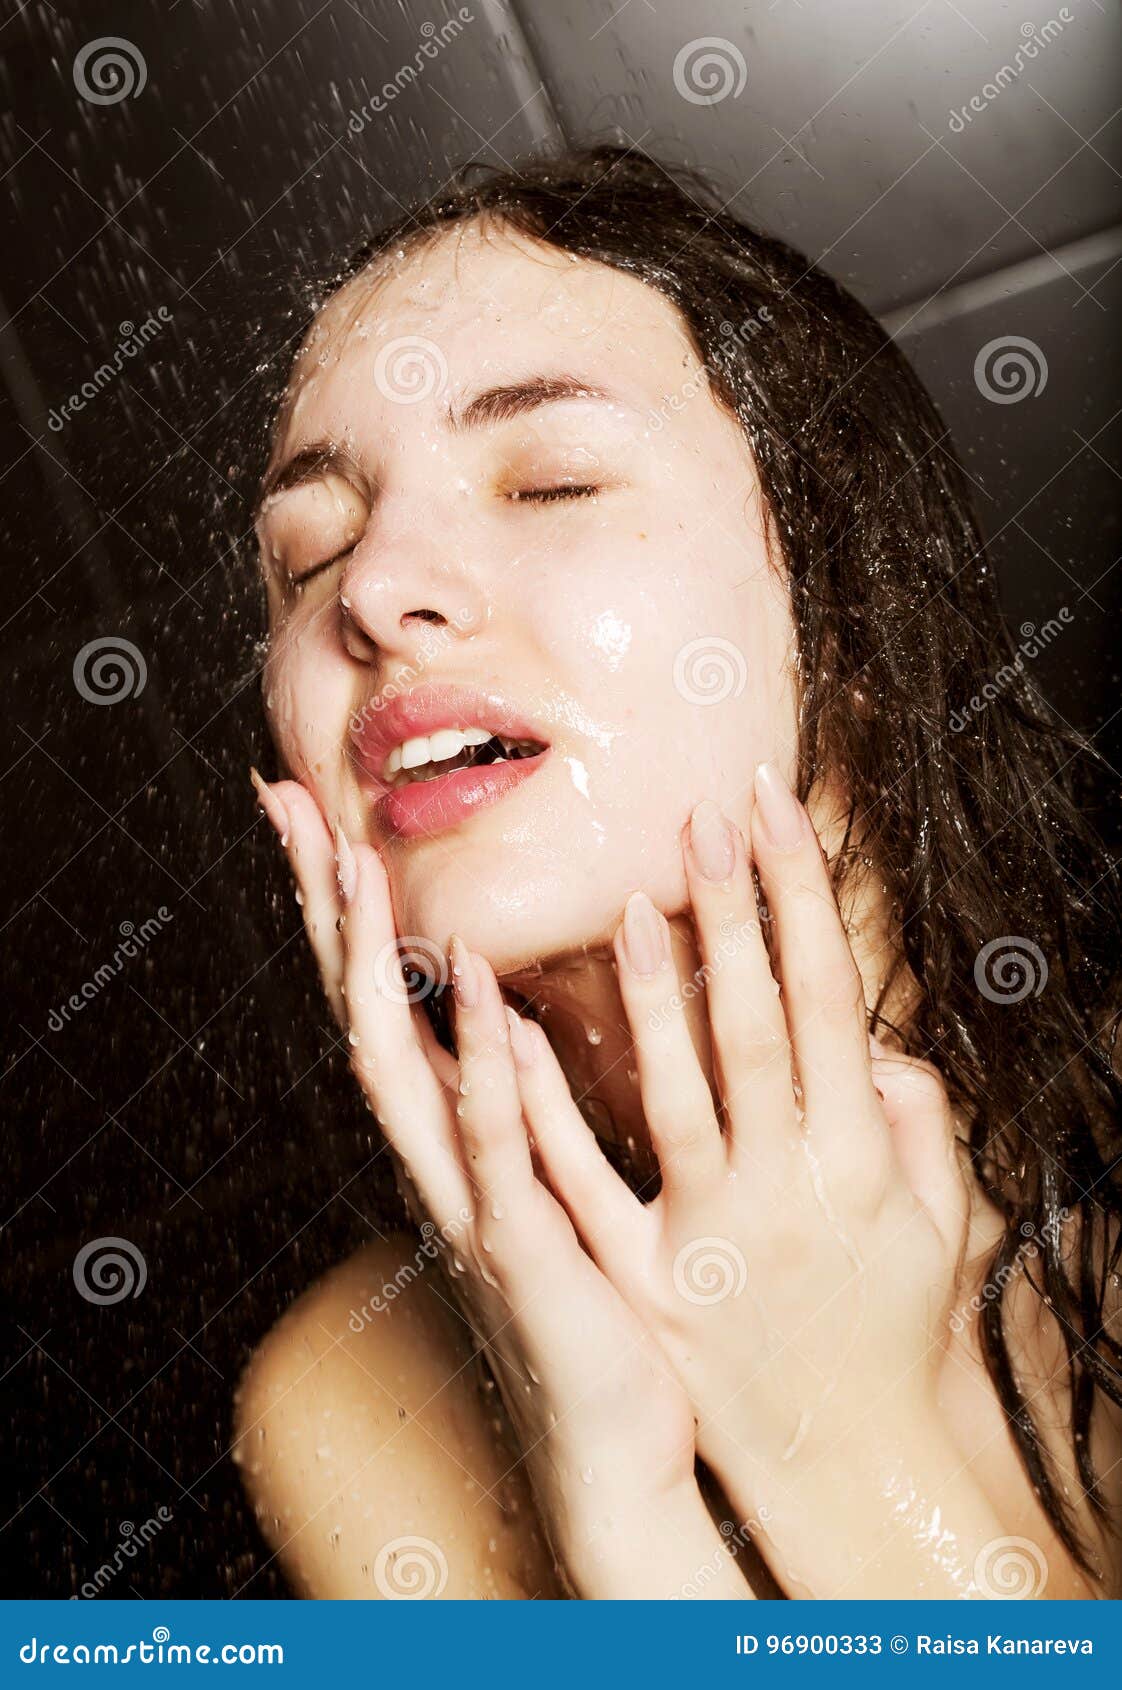 Girl Taking A Shower Stock Image Image Of Male Bathroom 96900333 